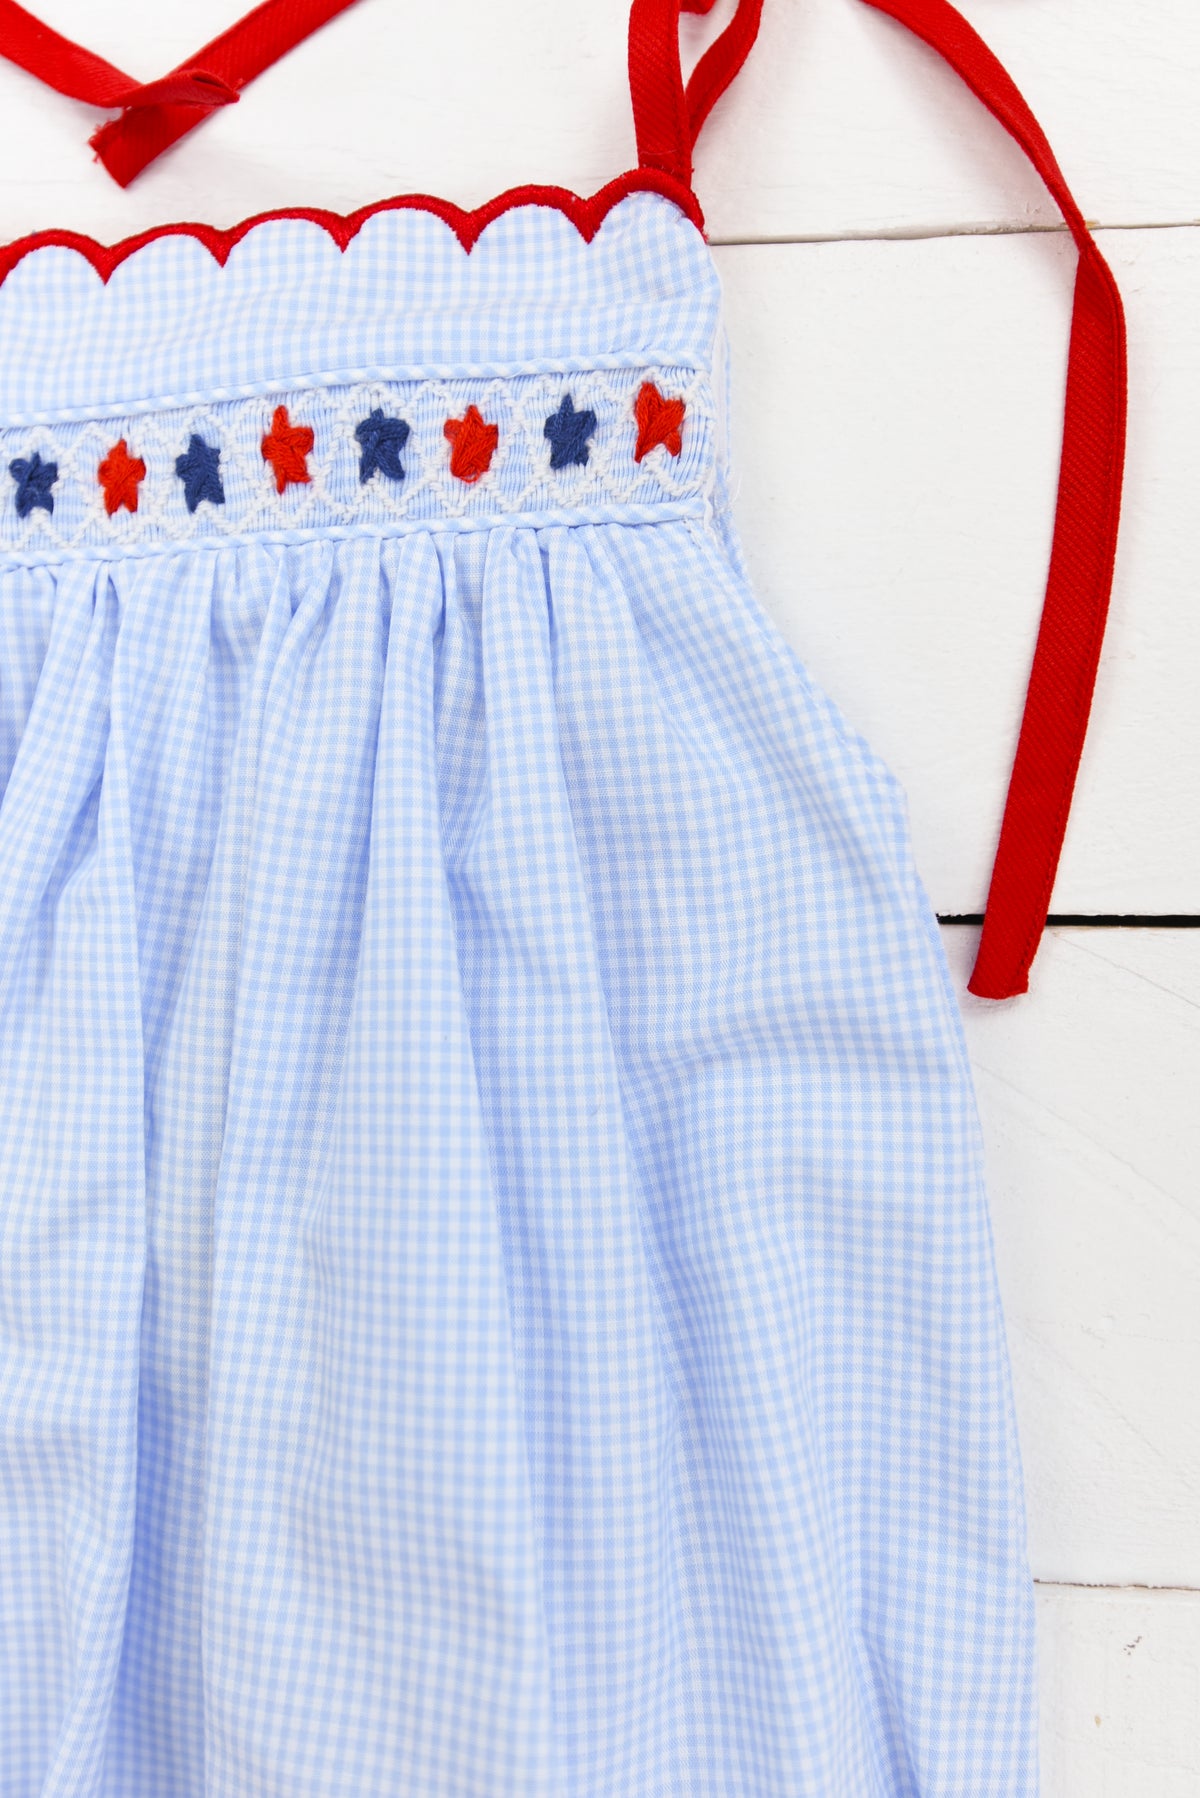 a blue and white checkered dress with red bows